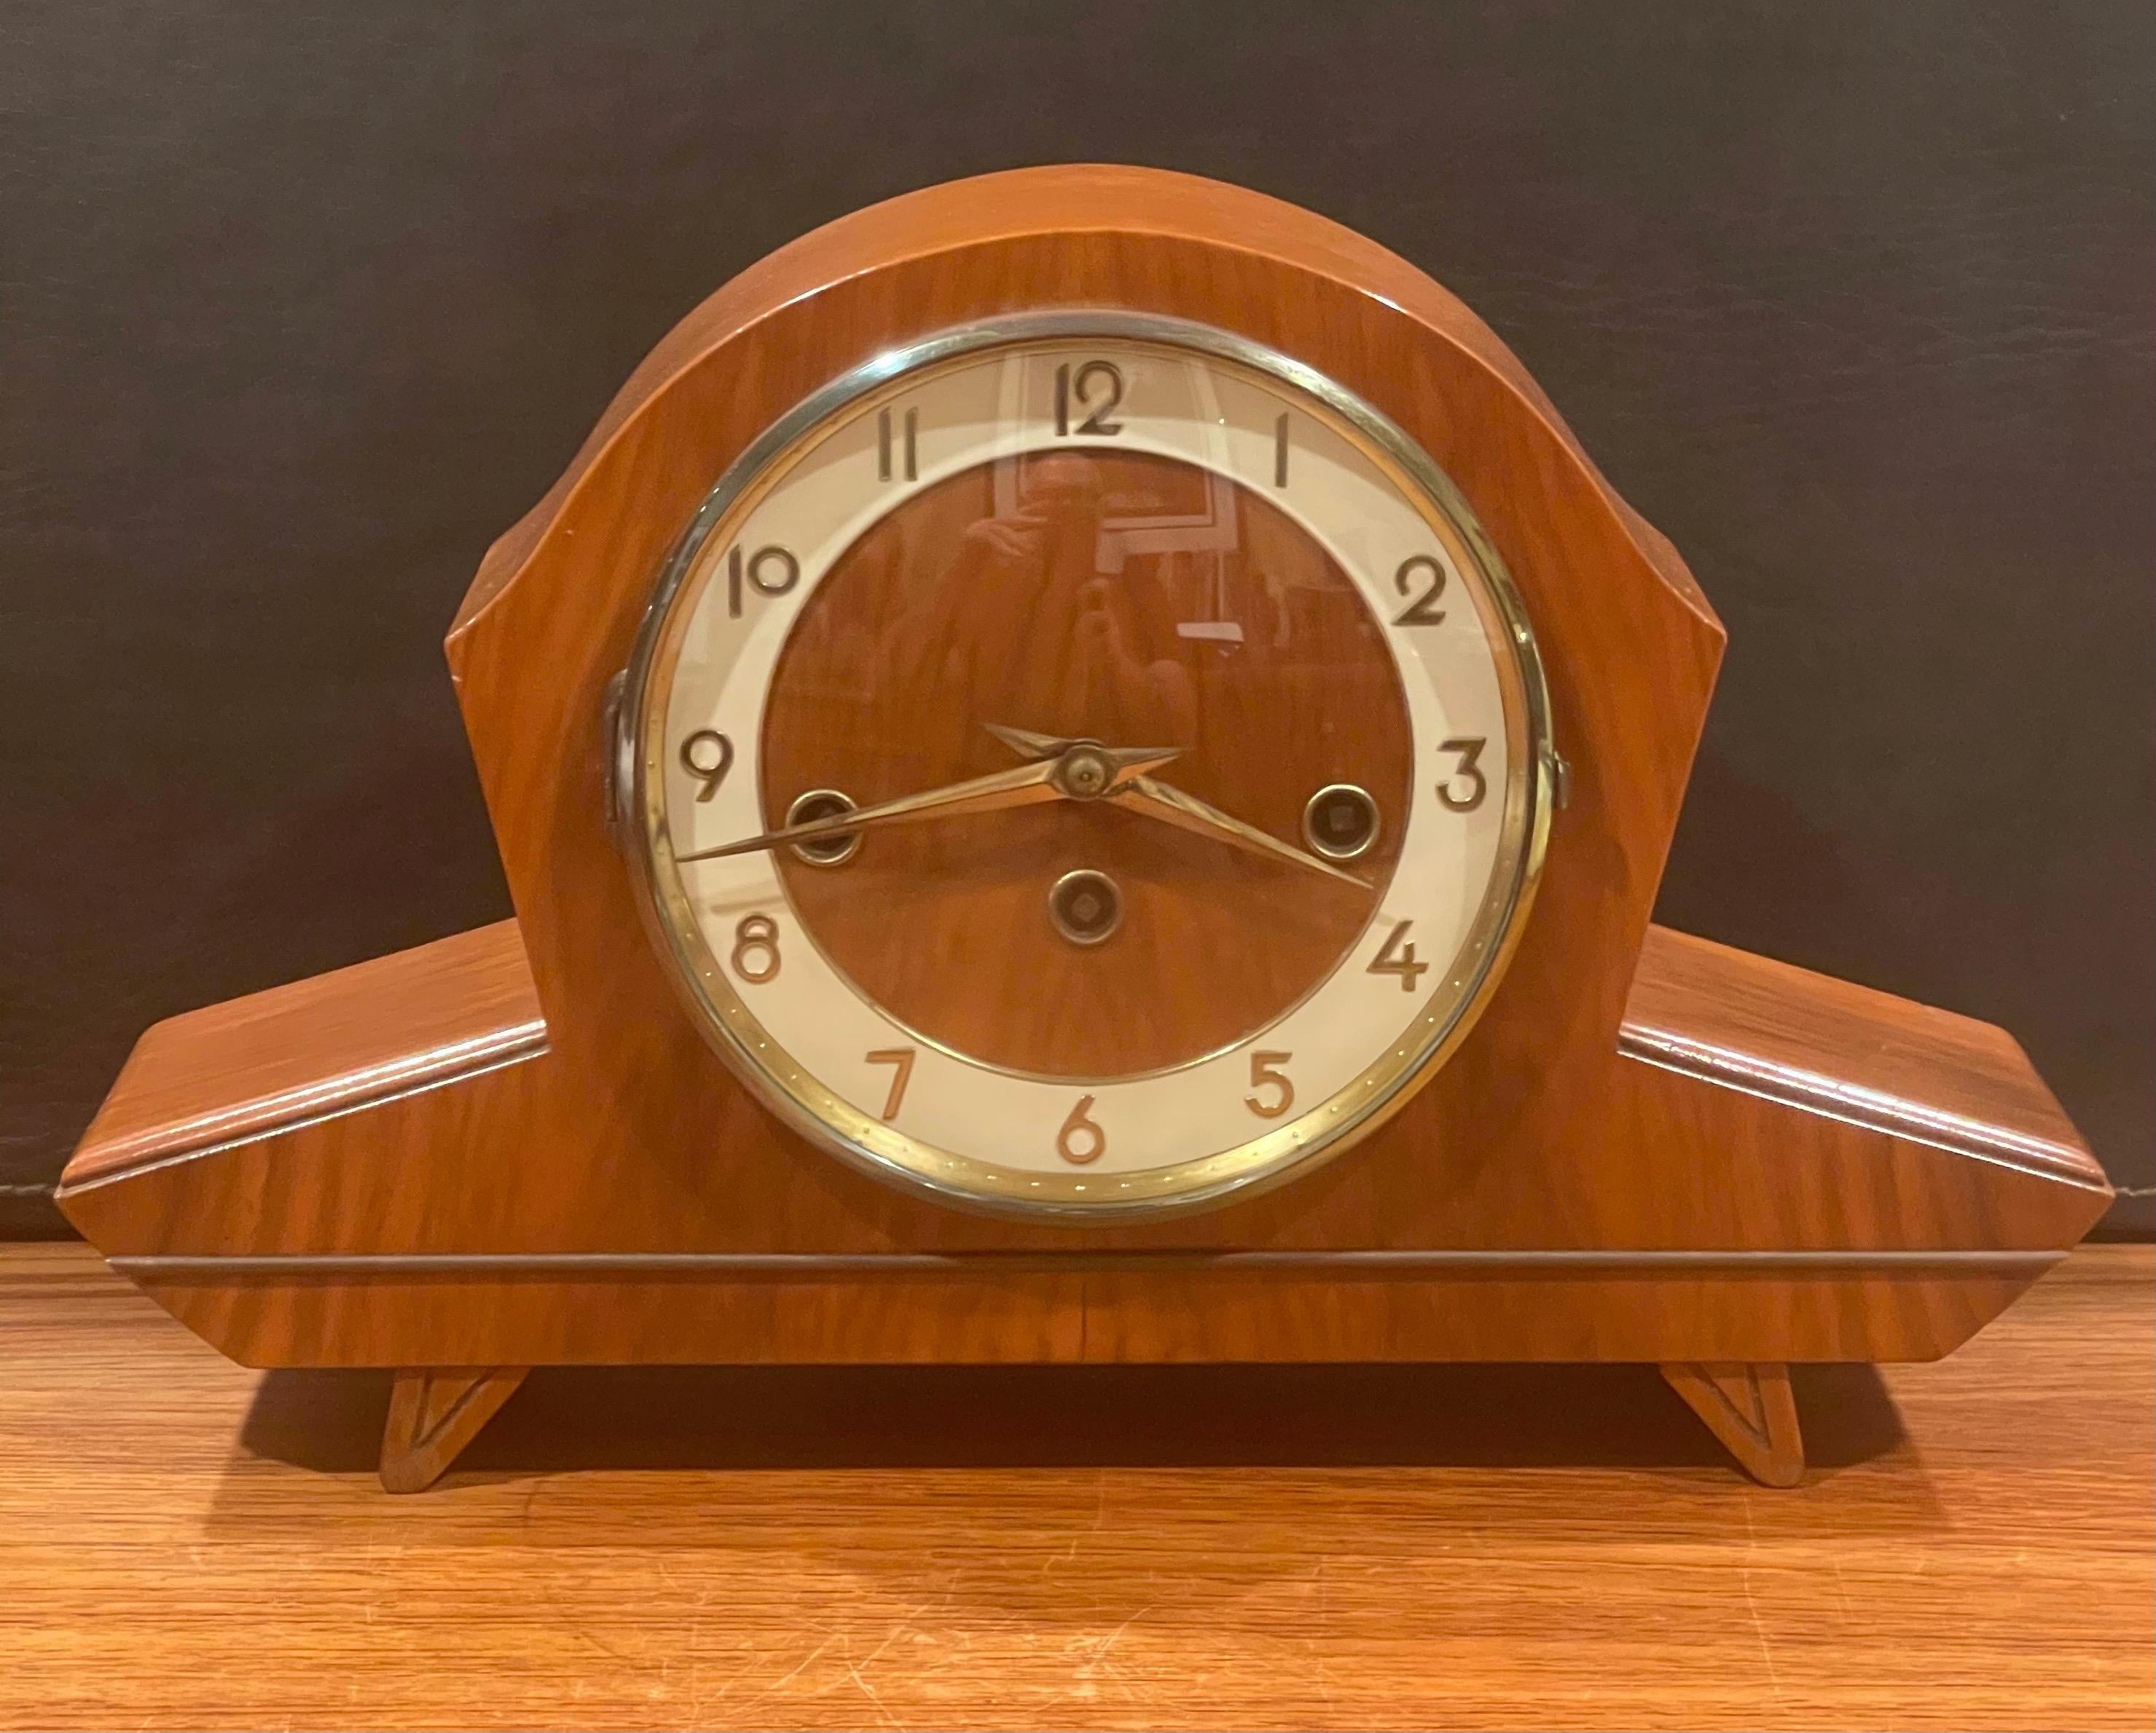 Elegant vintage Art Deco mantel clock with a German Hermie movement, circa 1950s. The clock is in very good vintage condition and holds accurate time. The chimes mechanism of the clock does not work. The clock has a great look and the dial is